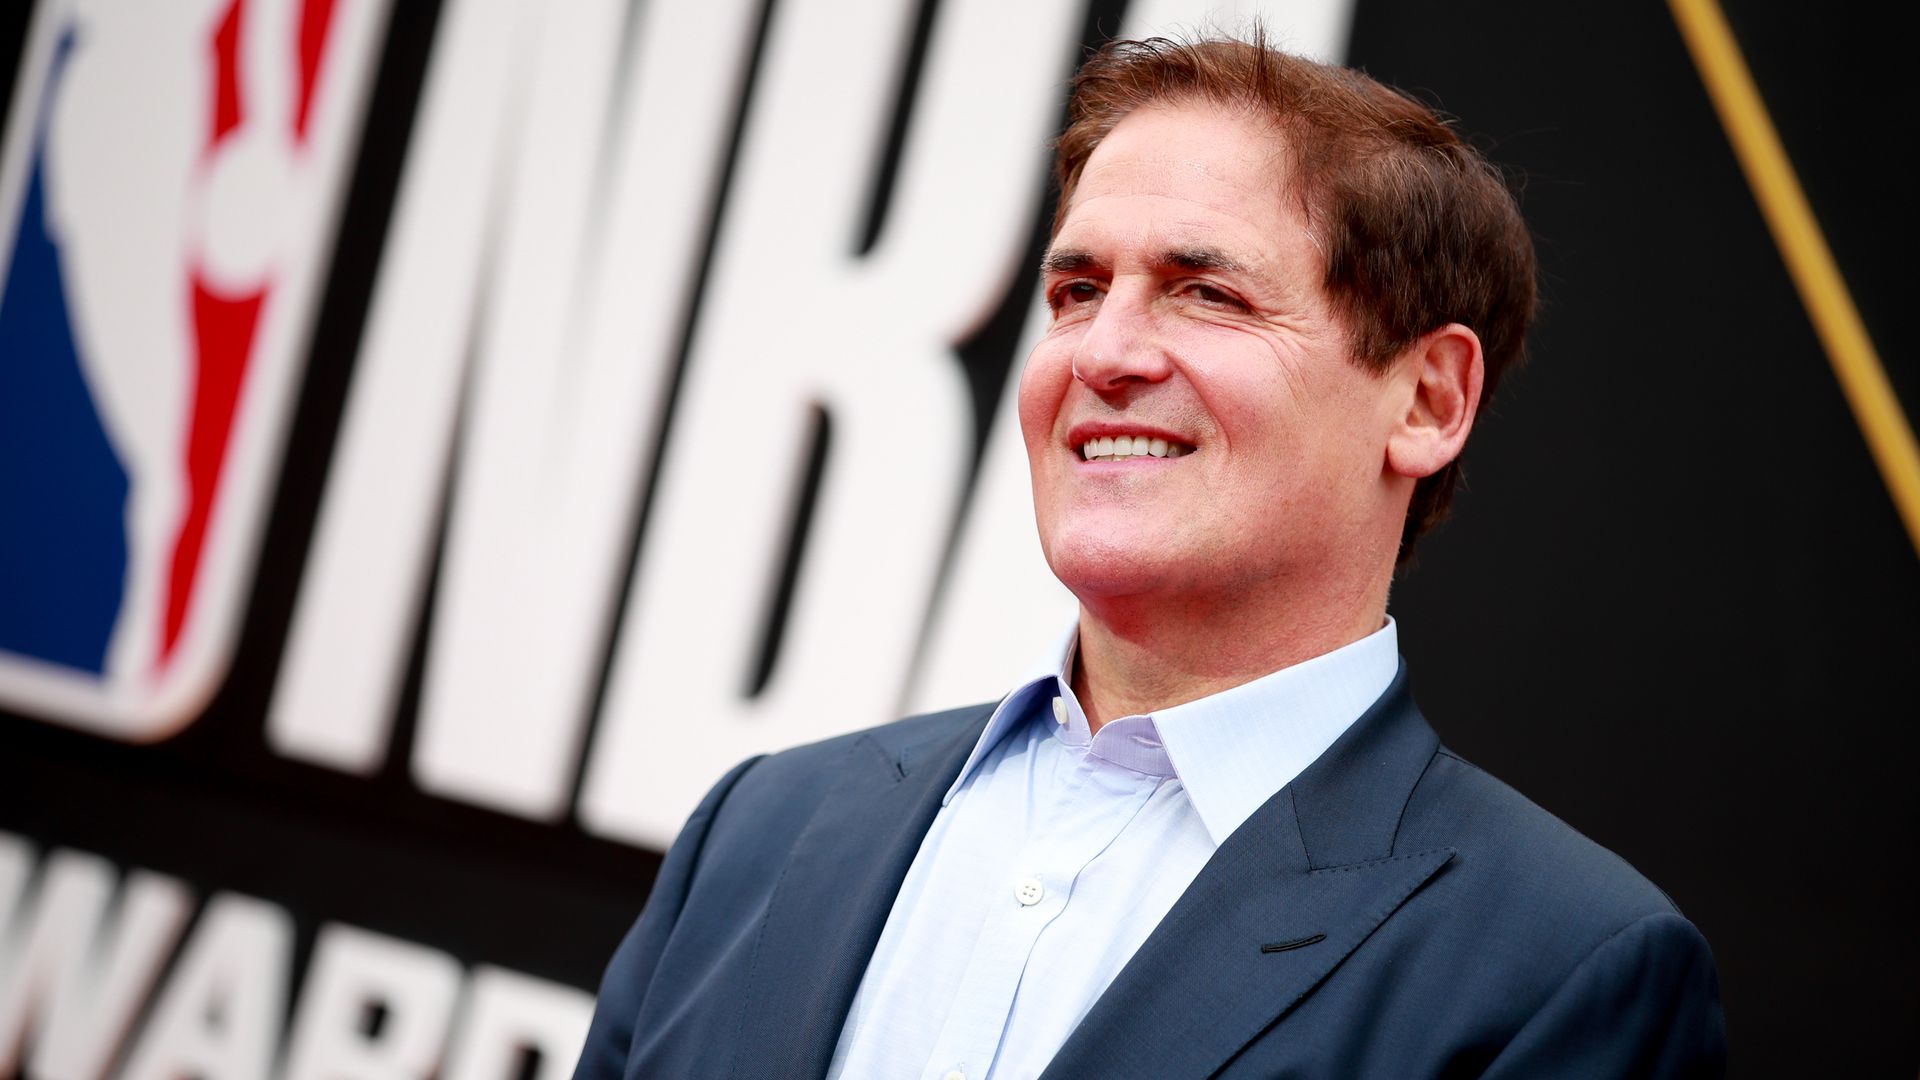 Picture of Mark Cuban